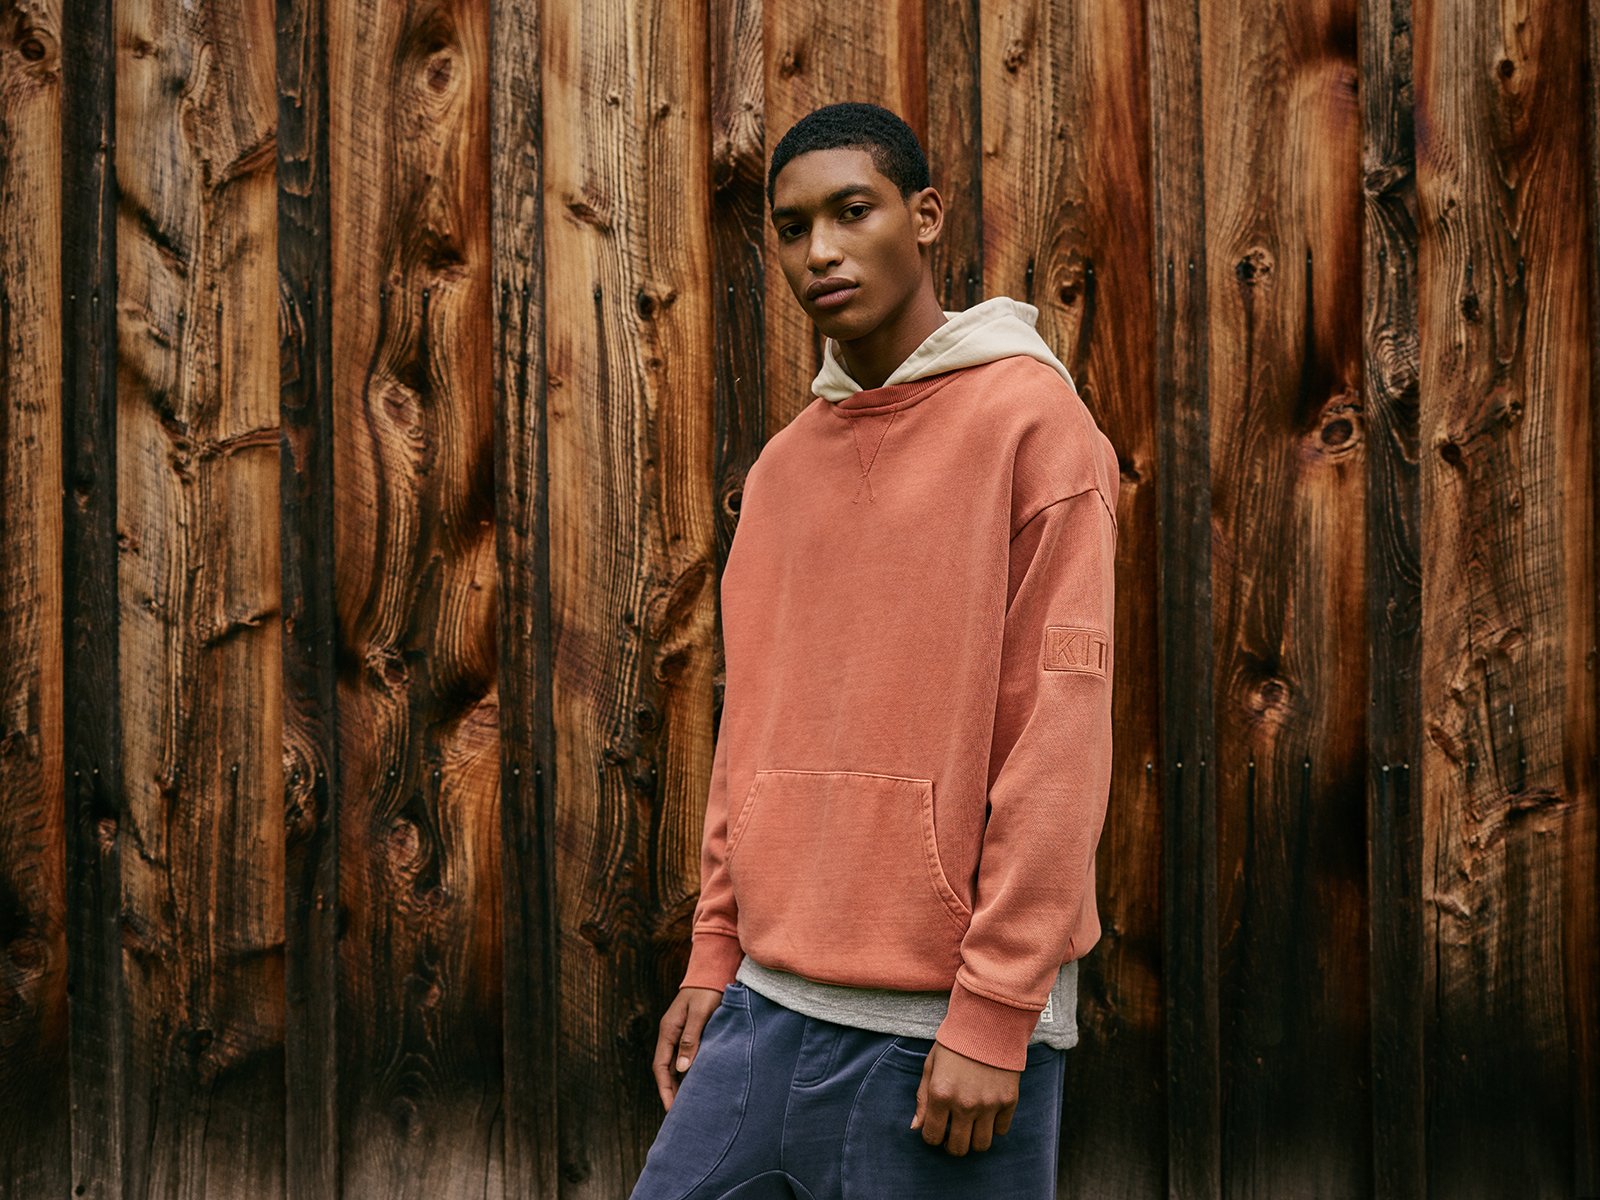 kith fall 2018 delivery 1 ronnie fieg